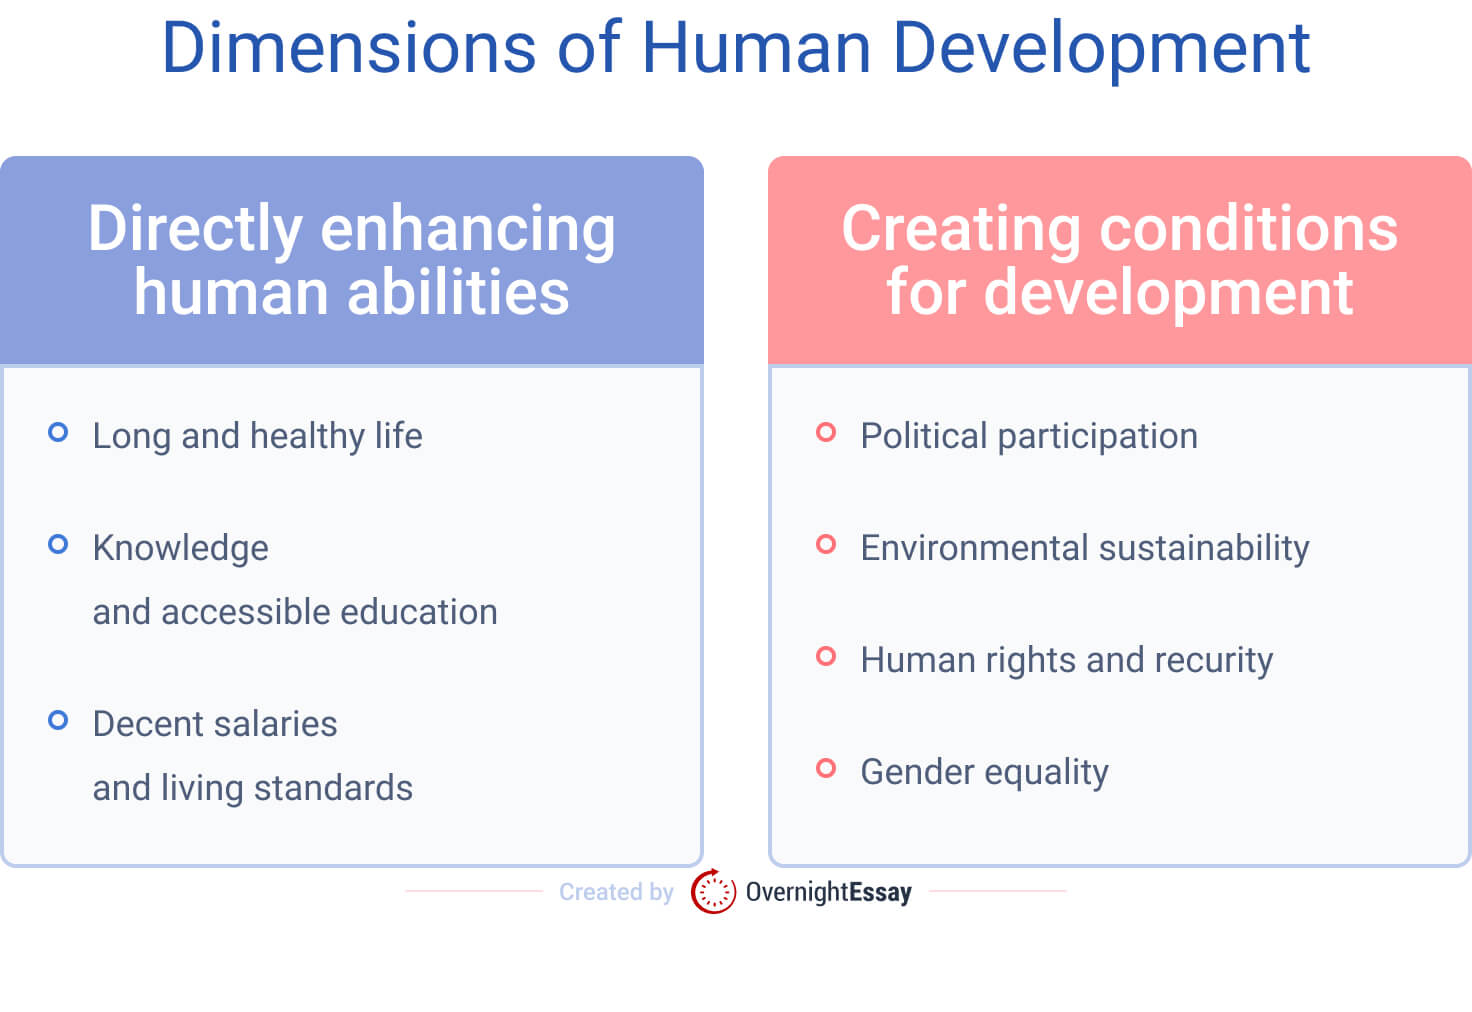 Human development has two dimensions: enhancement of human abilities and provision of prerequisites for our growth.